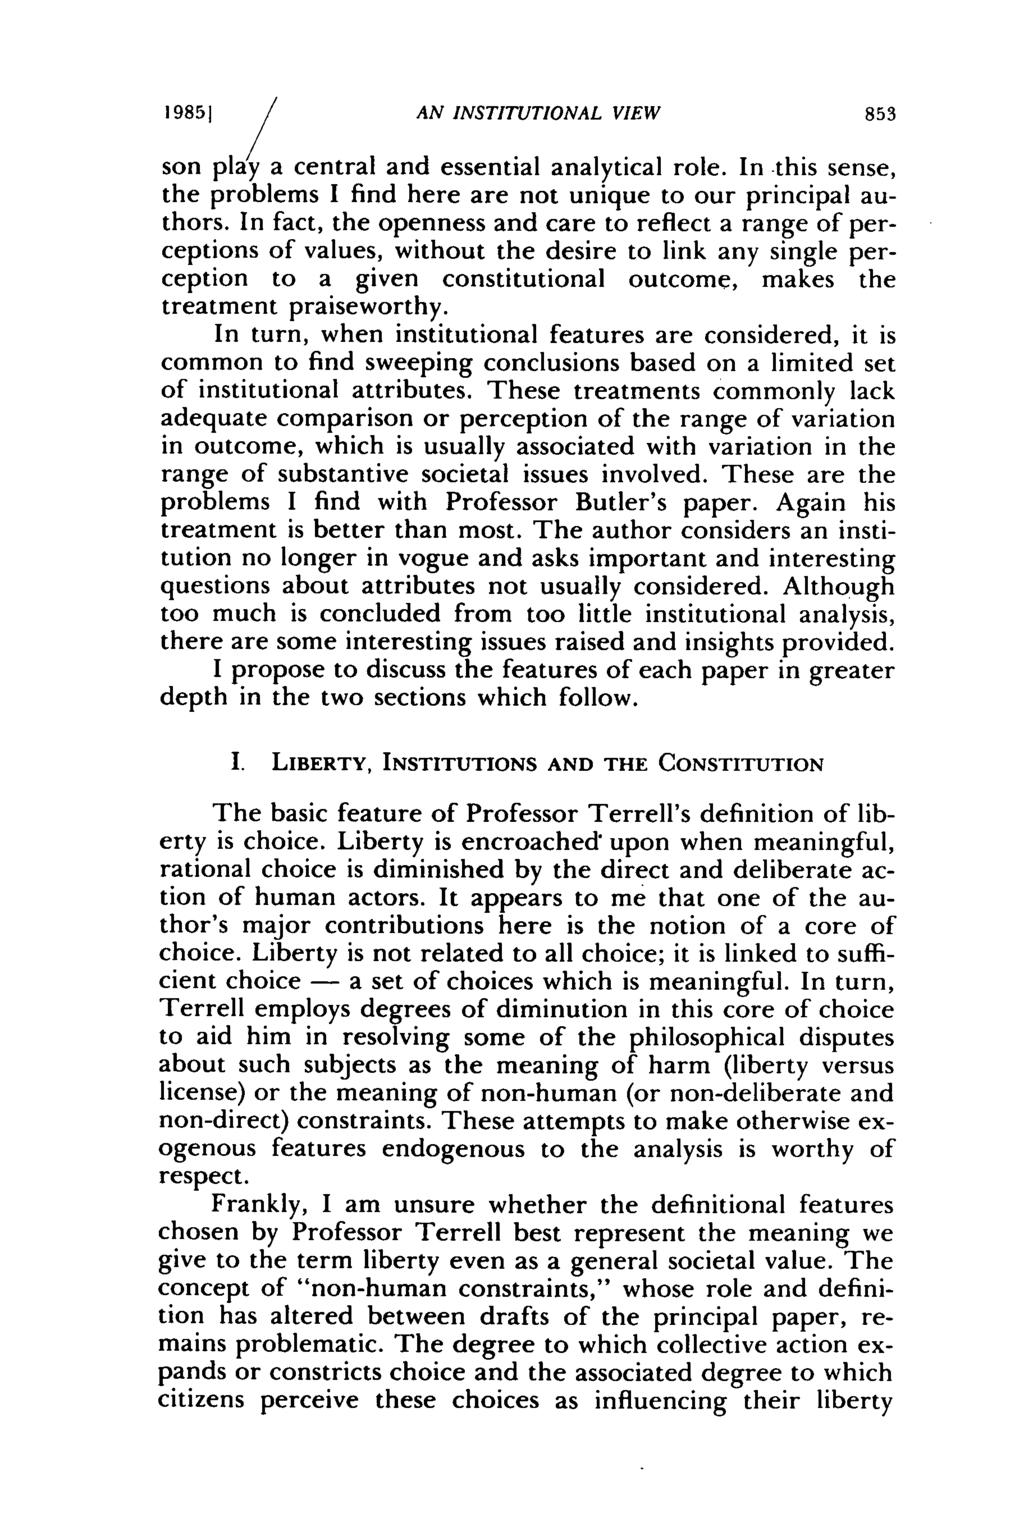 19851 AN INSTITUTIONAL VIEW 853 son play a central and essential analytical role. In this sense, the problems I find here are not unique to our principal authors.